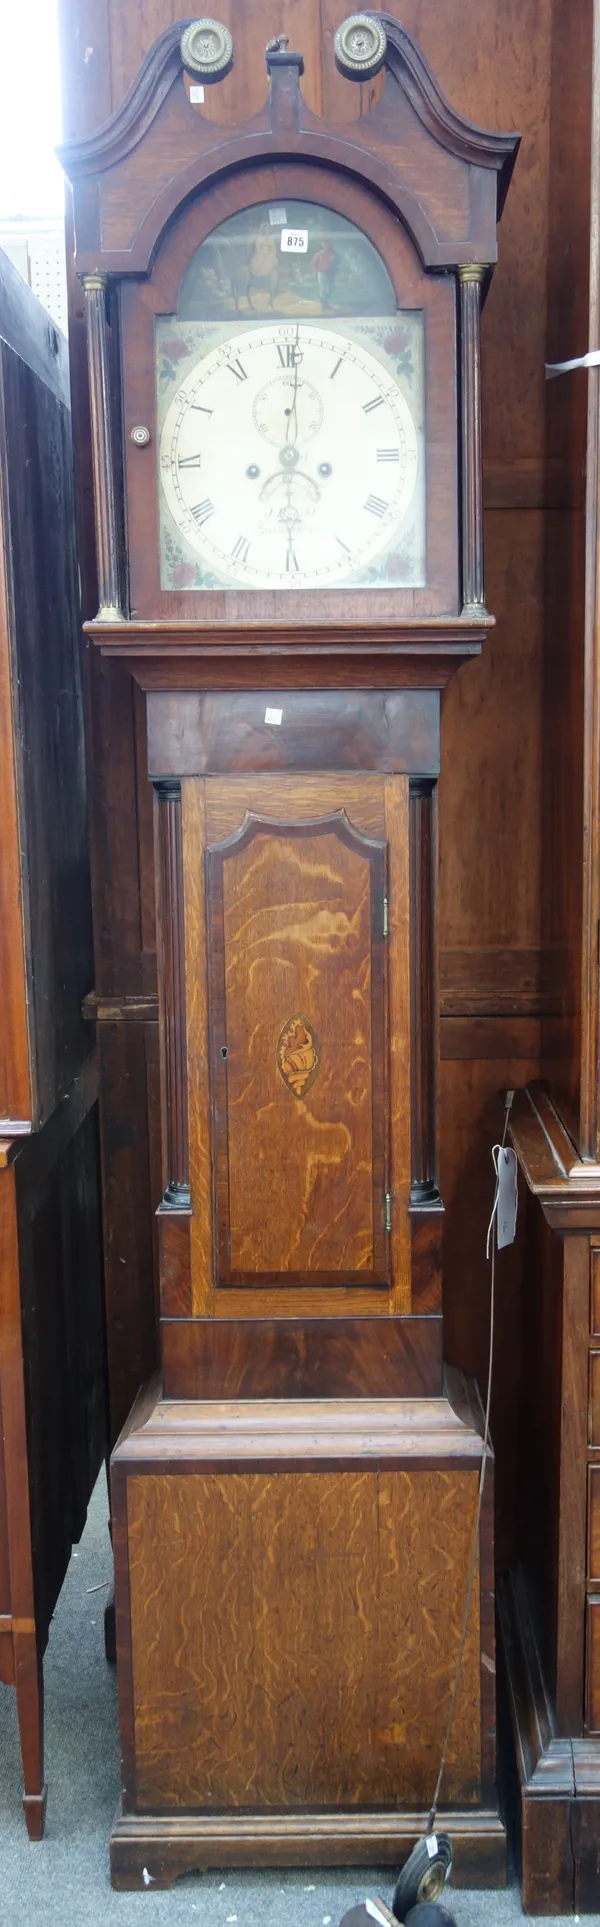 A George III oak and crossbanded longcase clock, J. Bright, Saxmundham, with a swan neck pediment above a conch shell inlaid trunk door, the arched pa